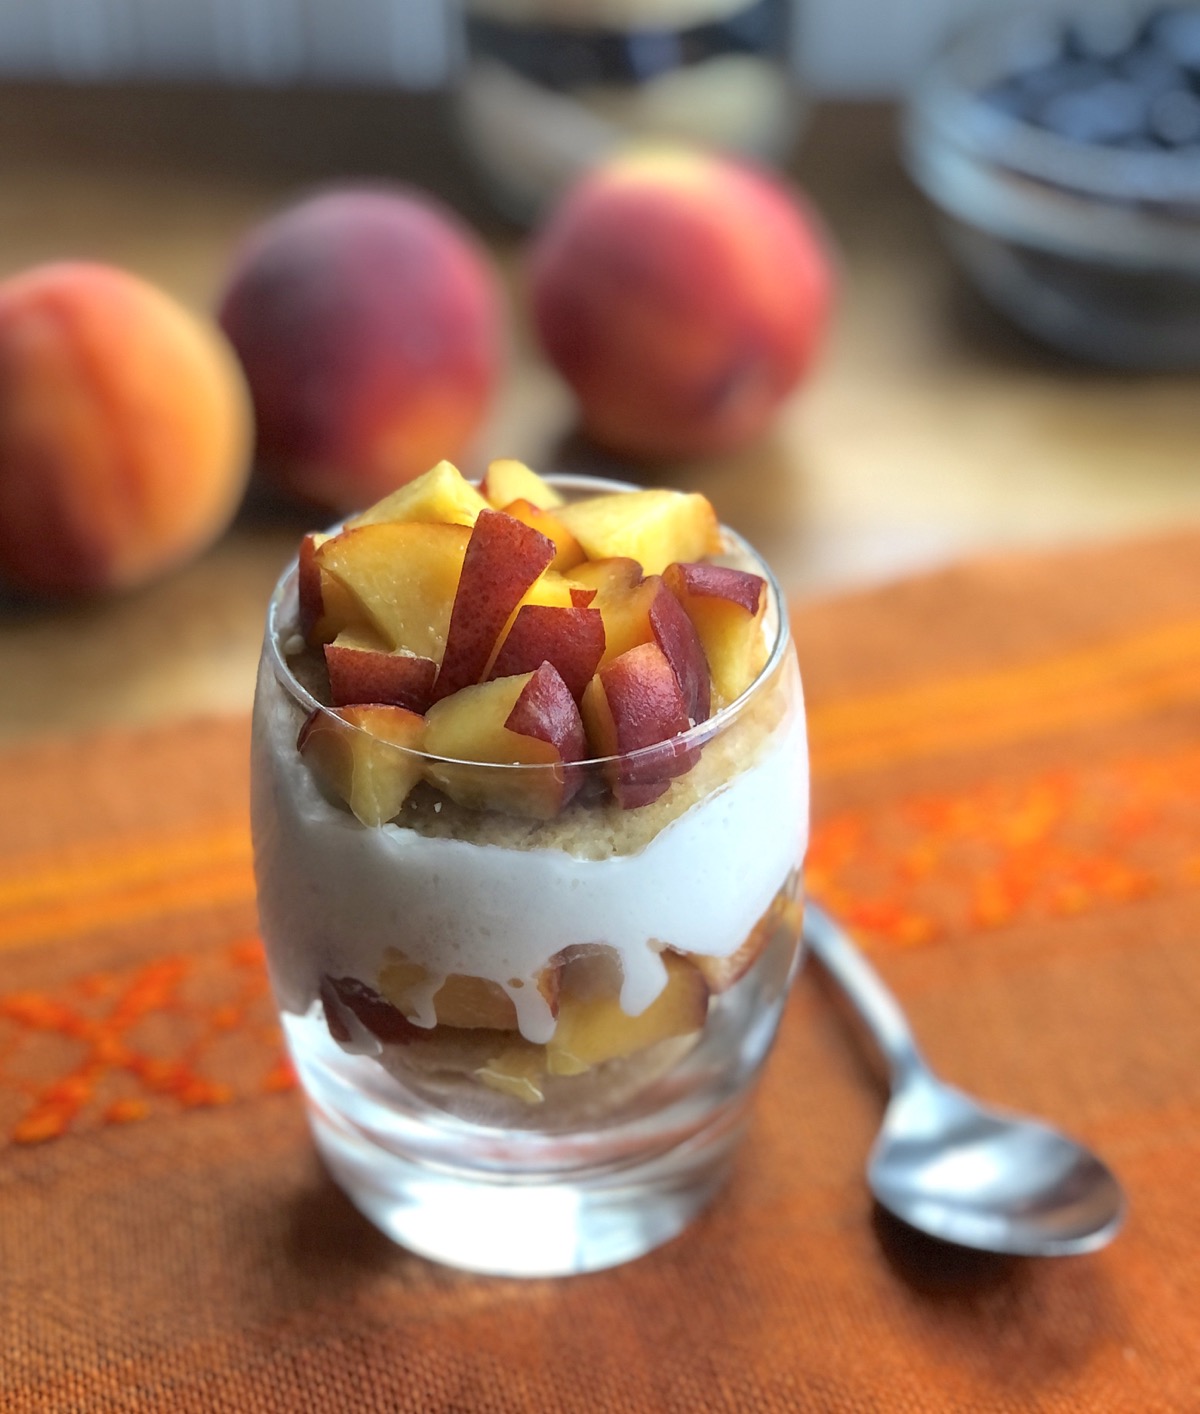 A peach shortcake in a clear cocktail glass showing layers of biscuit, diced peaches, and whipped cream.